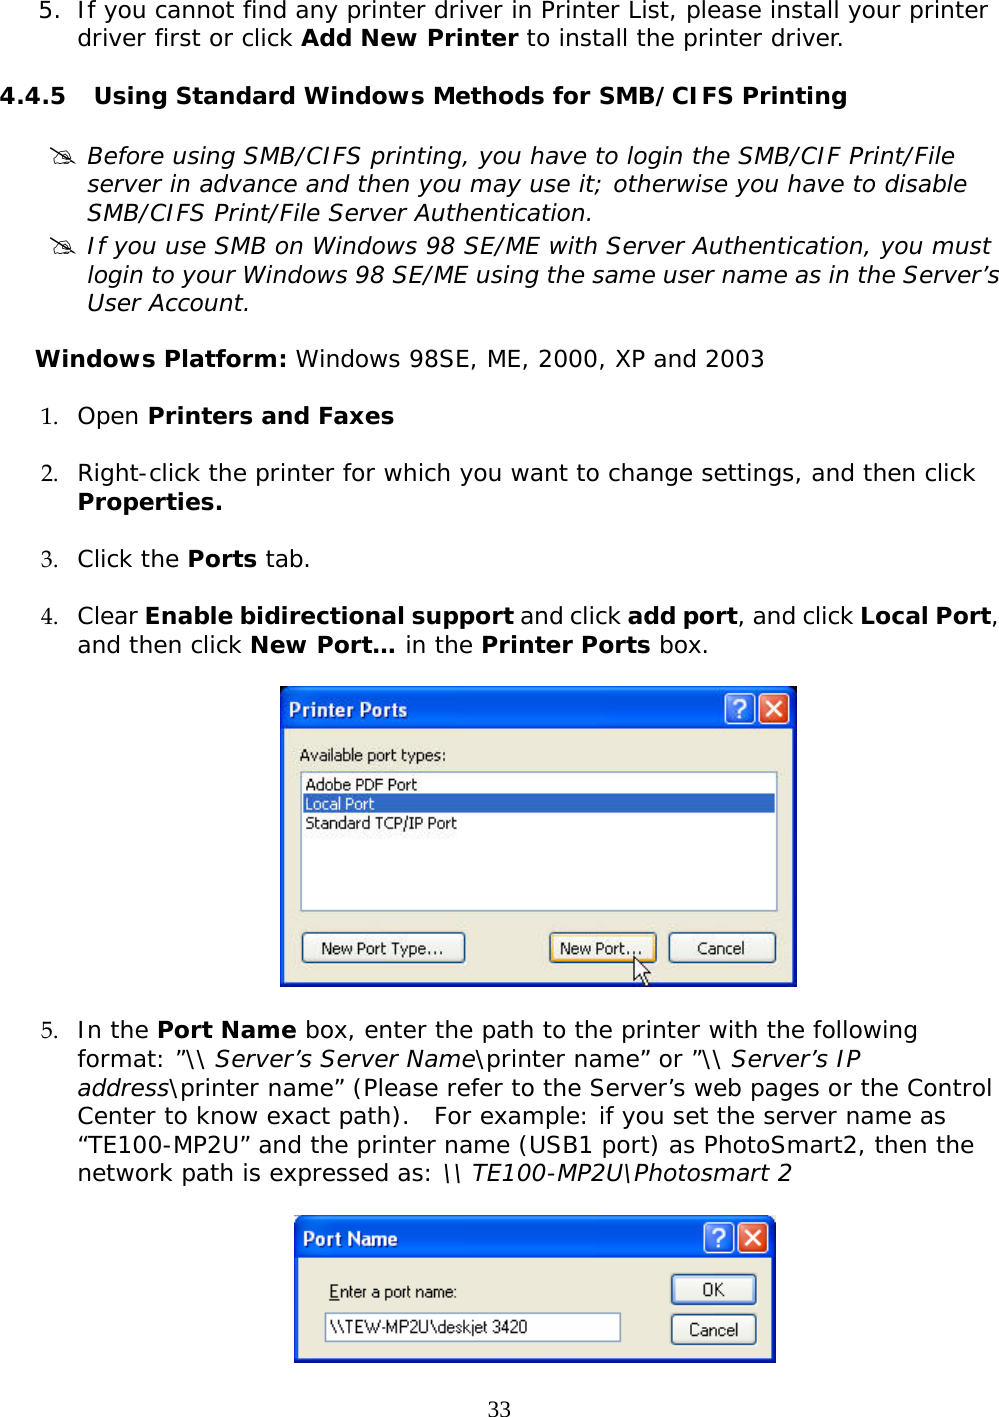     33 5. If you cannot find any printer driver in Printer List, please install your printer driver first or click Add New Printer to install the printer driver.  4.4.5 Using Standard Windows Methods for SMB/CIFS Printing  # Before using SMB/CIFS printing, you have to login the SMB/CIF Print/File server in advance and then you may use it; otherwise you have to disable SMB/CIFS Print/File Server Authentication. # If you use SMB on Windows 98 SE/ME with Server Authentication, you must login to your Windows 98 SE/ME using the same user name as in the Server’s User Account.  Windows Platform: Windows 98SE, ME, 2000, XP and 2003 1. Open Printers and Faxes   2. Right-click the printer for which you want to change settings, and then click Properties.  3. Click the Ports tab.  4. Clear Enable bidirectional support and click add port, and click Local Port, and then click New Port… in the Printer Ports box.     5. In the Port Name box, enter the path to the printer with the following format: ”\\ Server’s Server Name\printer name” or ”\\ Server’s IP address\printer name” (Please refer to the Server’s web pages or the Control Center to know exact path).  For example: if you set the server name as “TE100-MP2U” and the printer name (USB1 port) as PhotoSmart2, then the network path is expressed as: \\ TE100-MP2U\Photosmart 2    